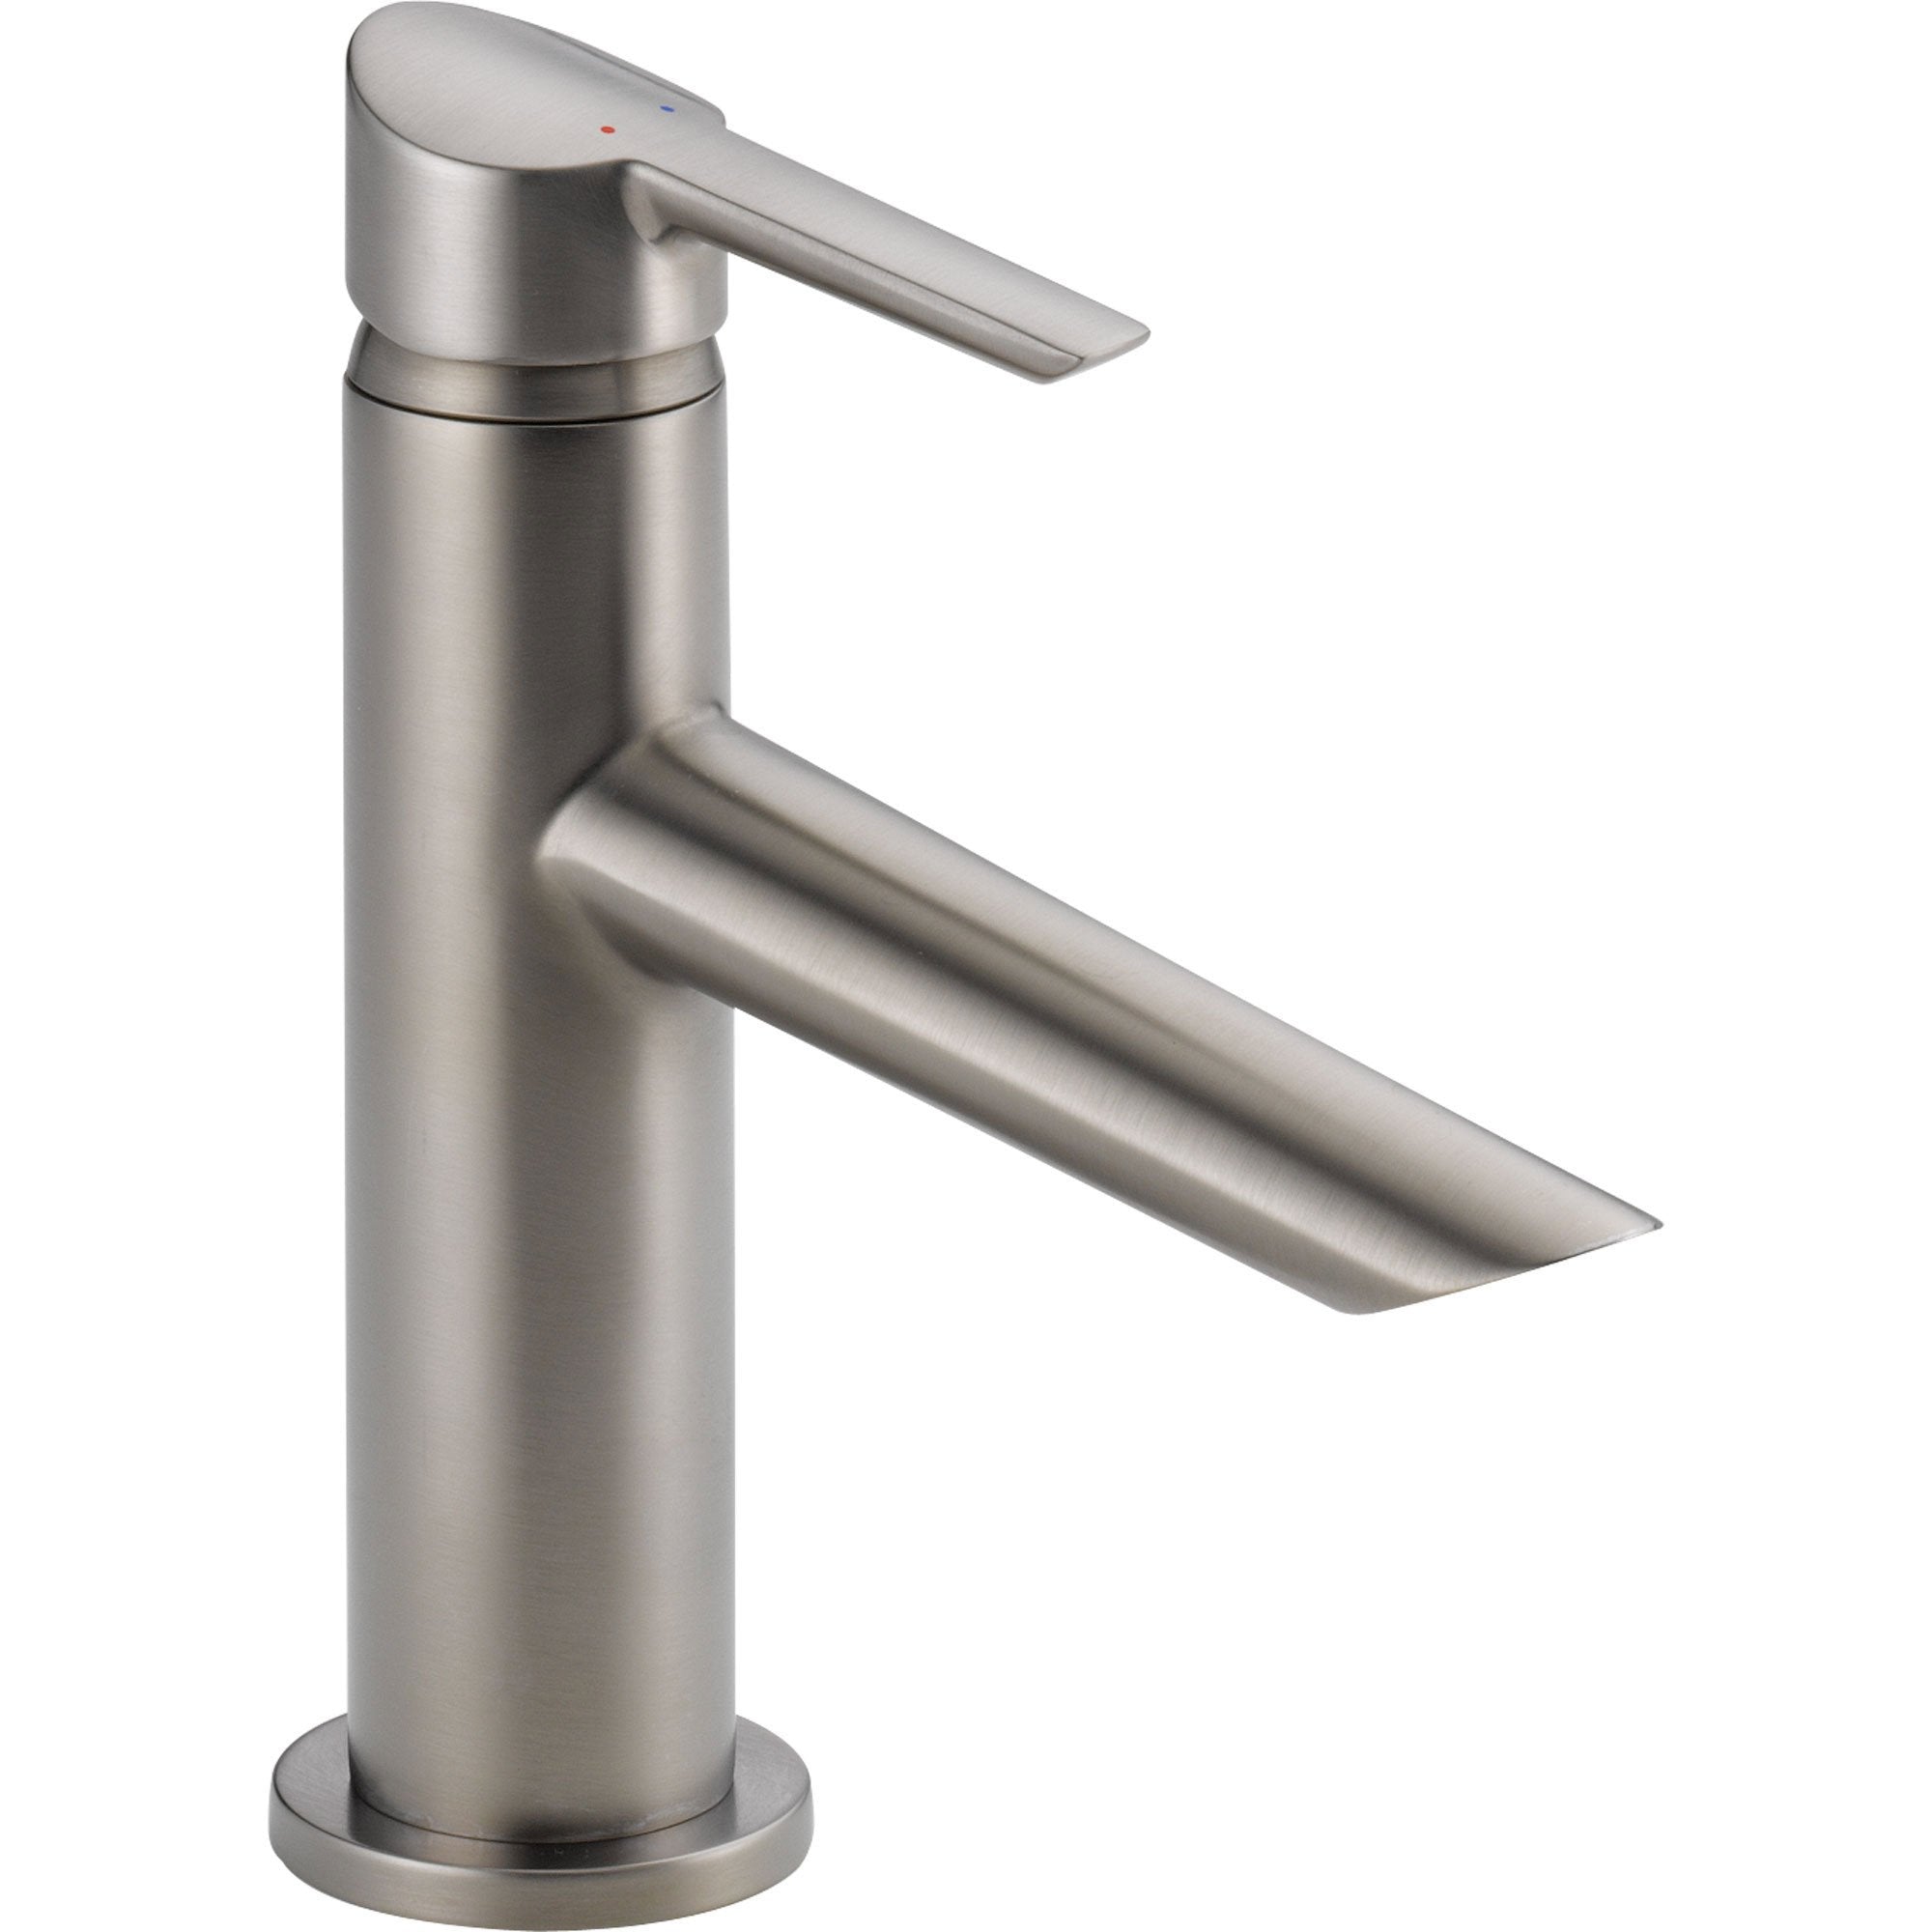 Delta Compel Modern Single Handle Stainless Steel Finish Bathroom Faucet 584028